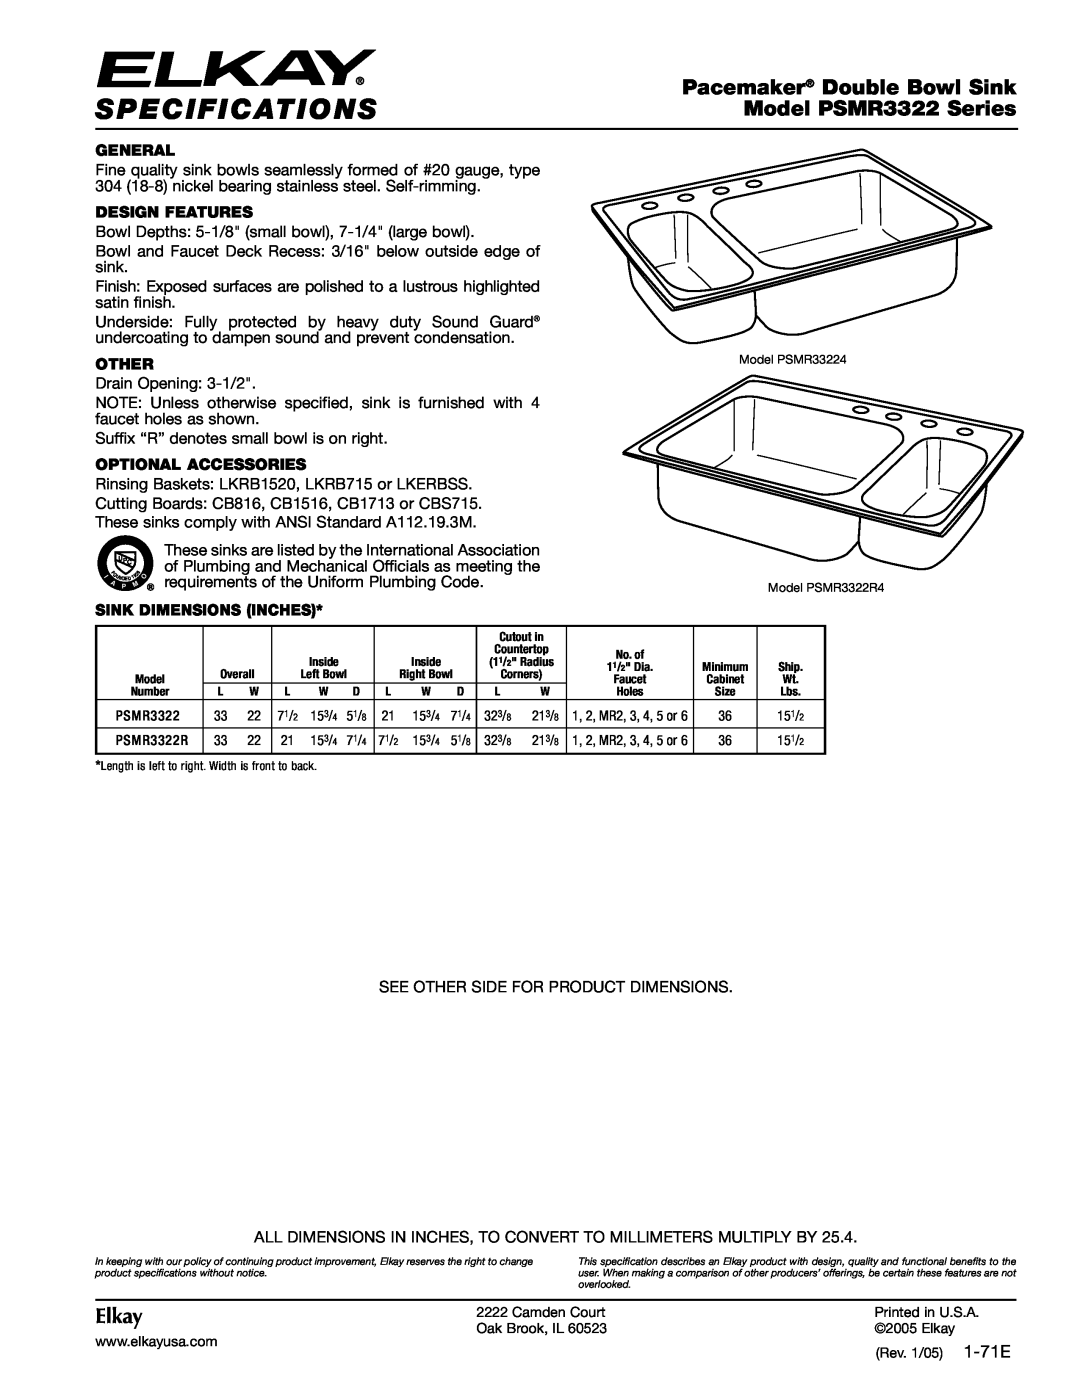 Elkay specifications Specifications, Pacemaker Double Bowl Sink, Model PSMR3322 Series, Elkay, General, Design Features 